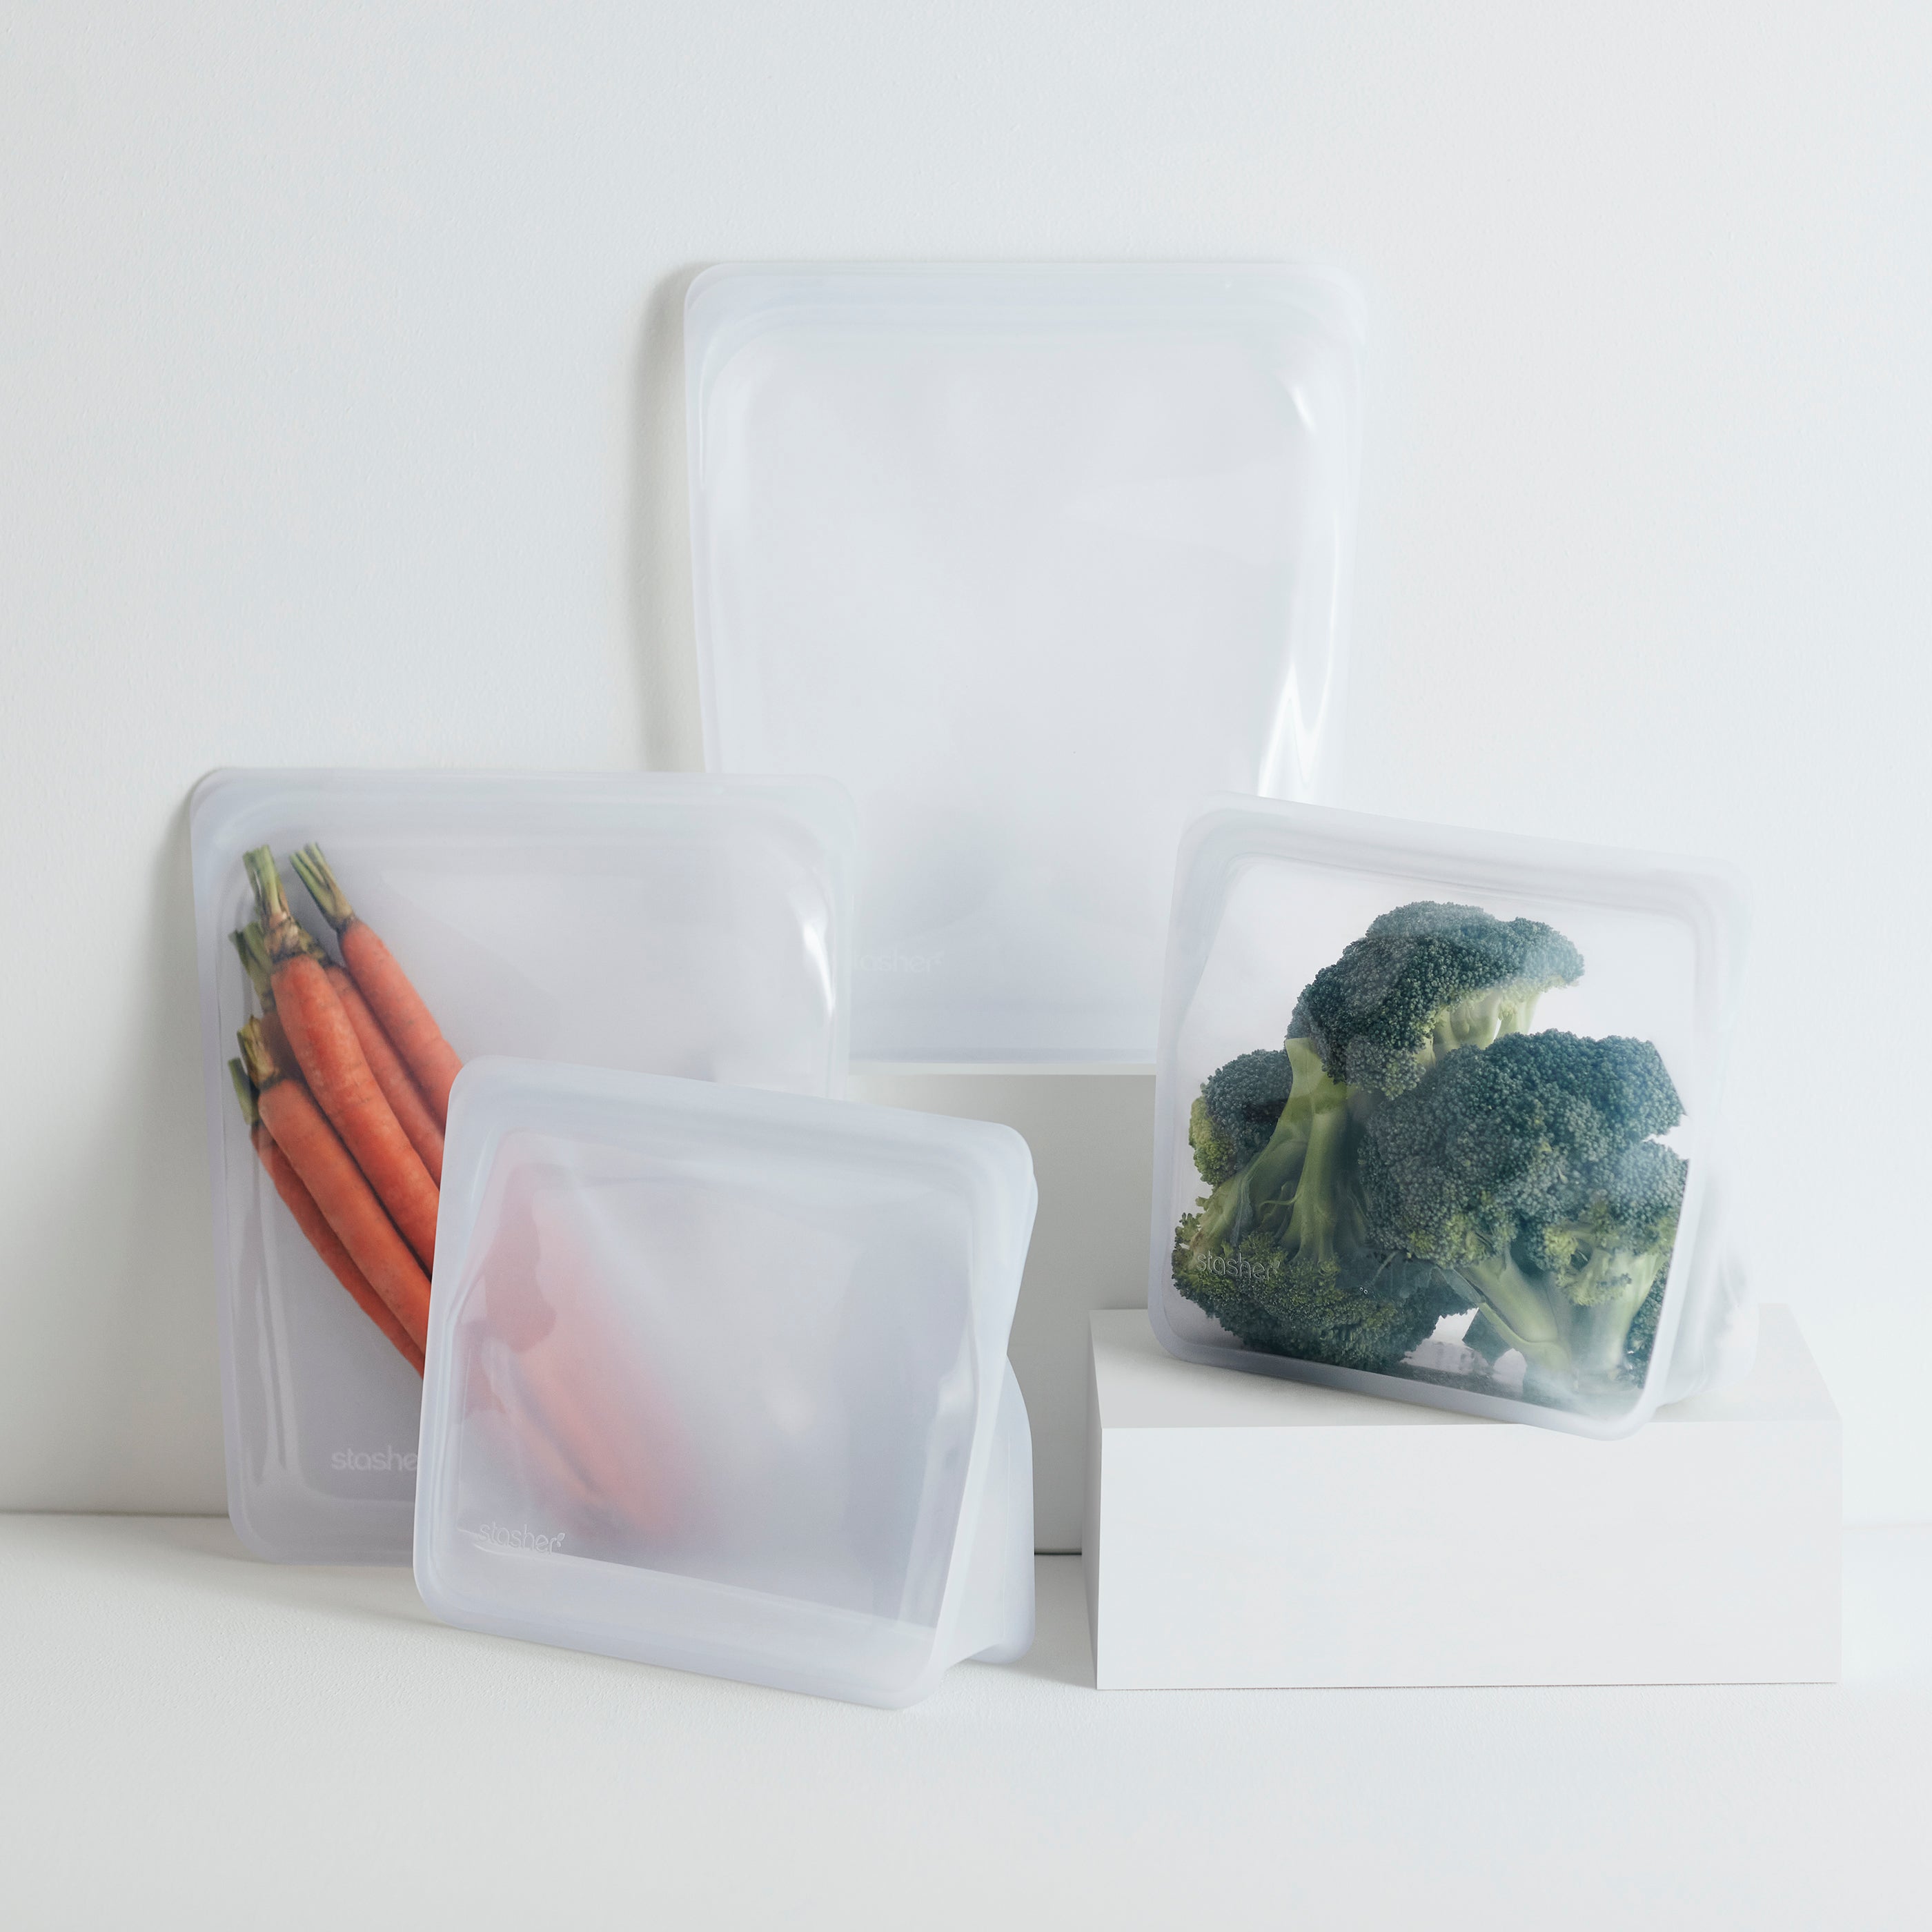 STOCKYFY Reusable Silicone Food Storage Bags with Mesh